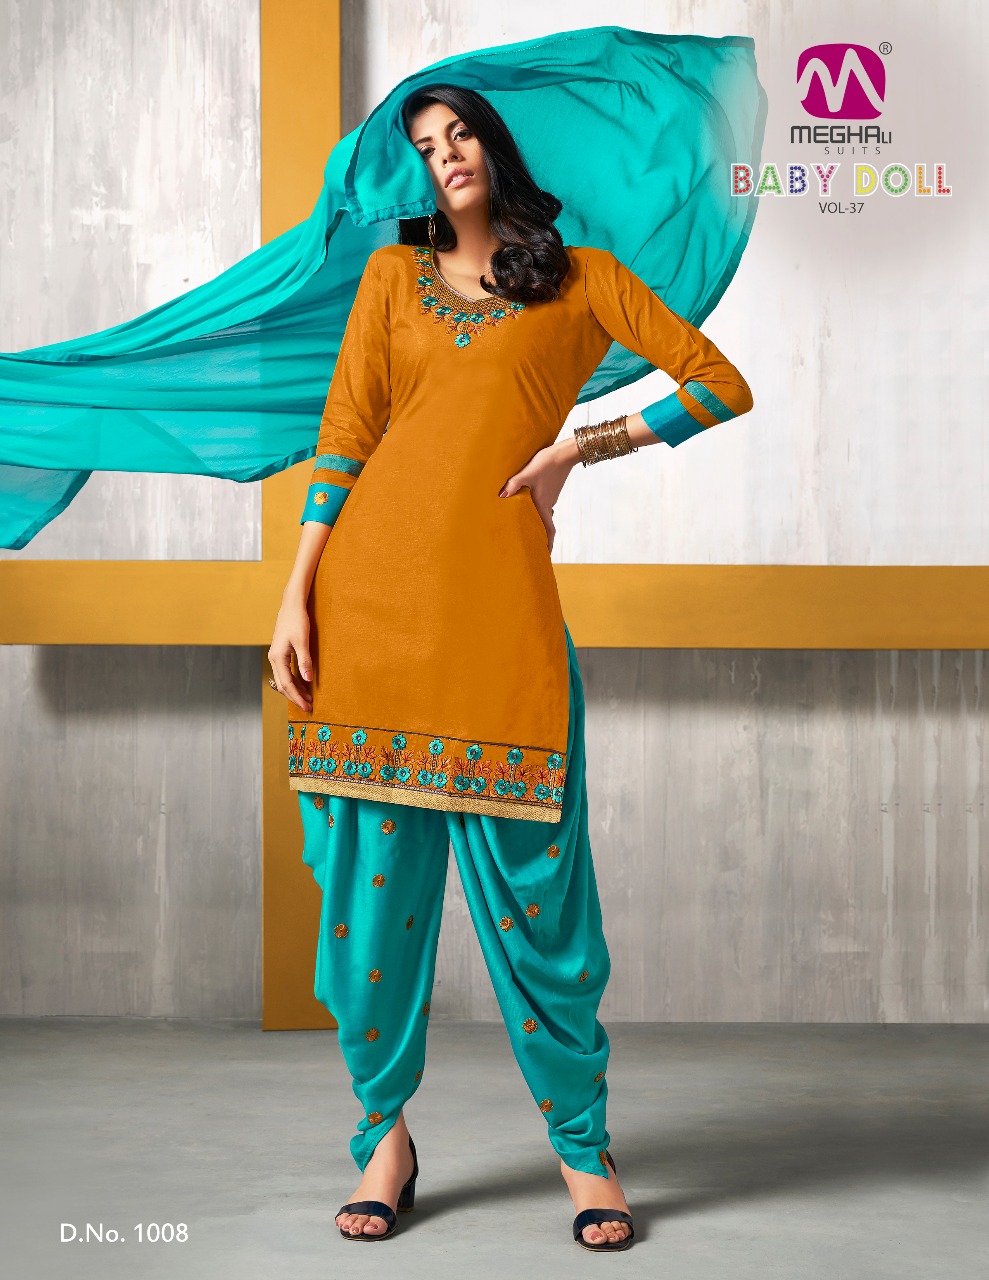 Meghali Suits Baby Doll 1008